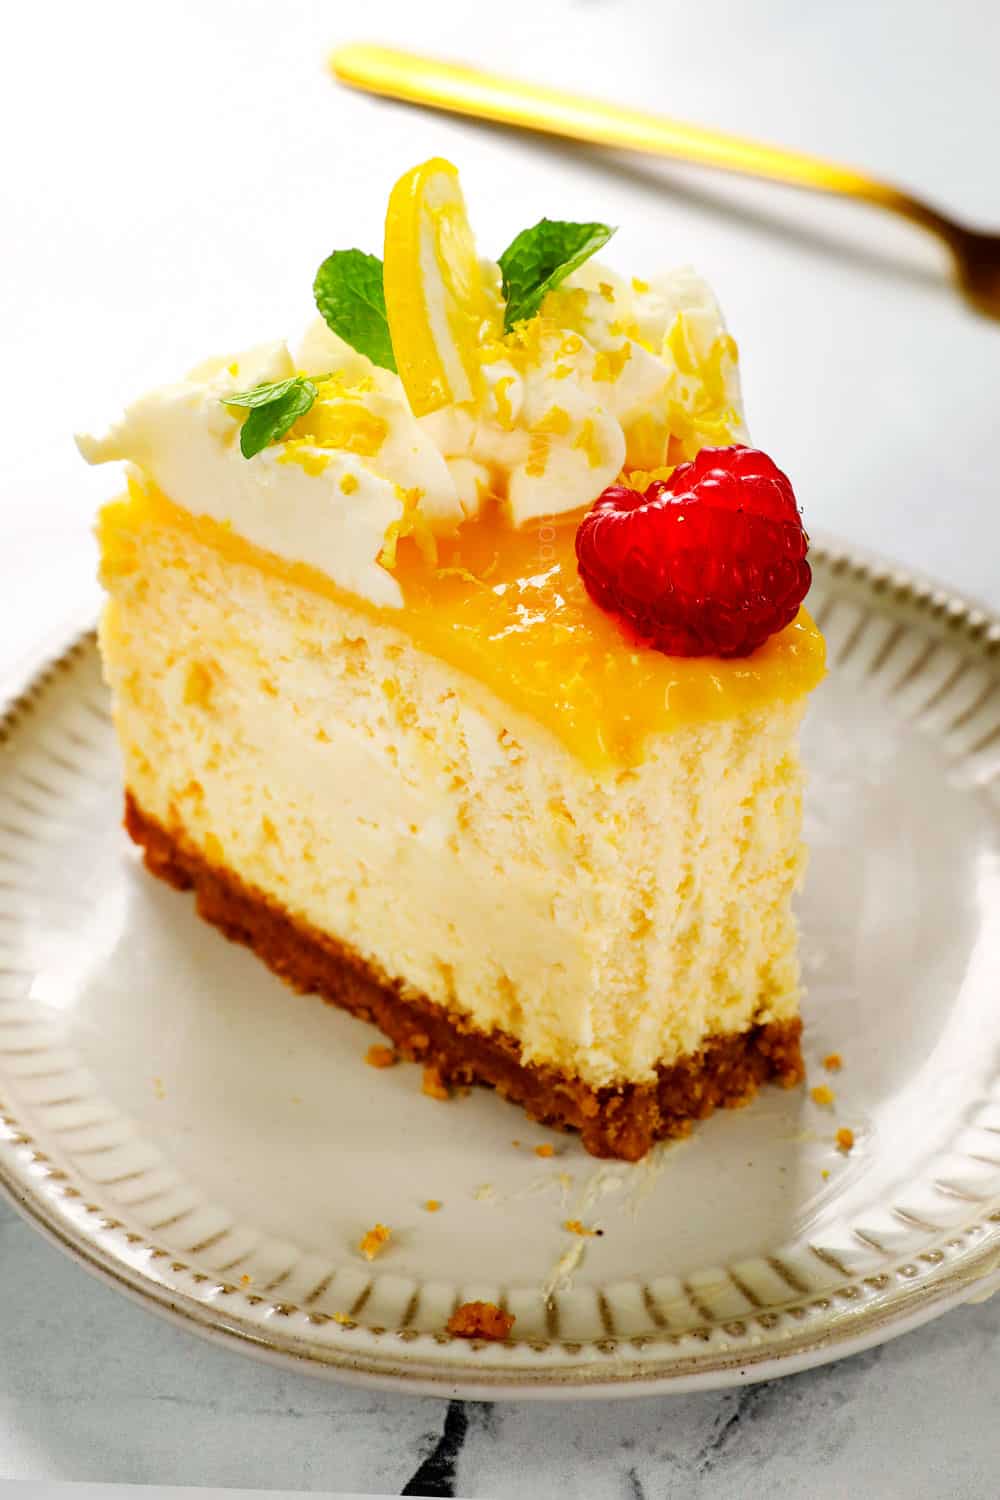 up close of a piece lemon cheesecake with a bite taken out showing how creamy it is